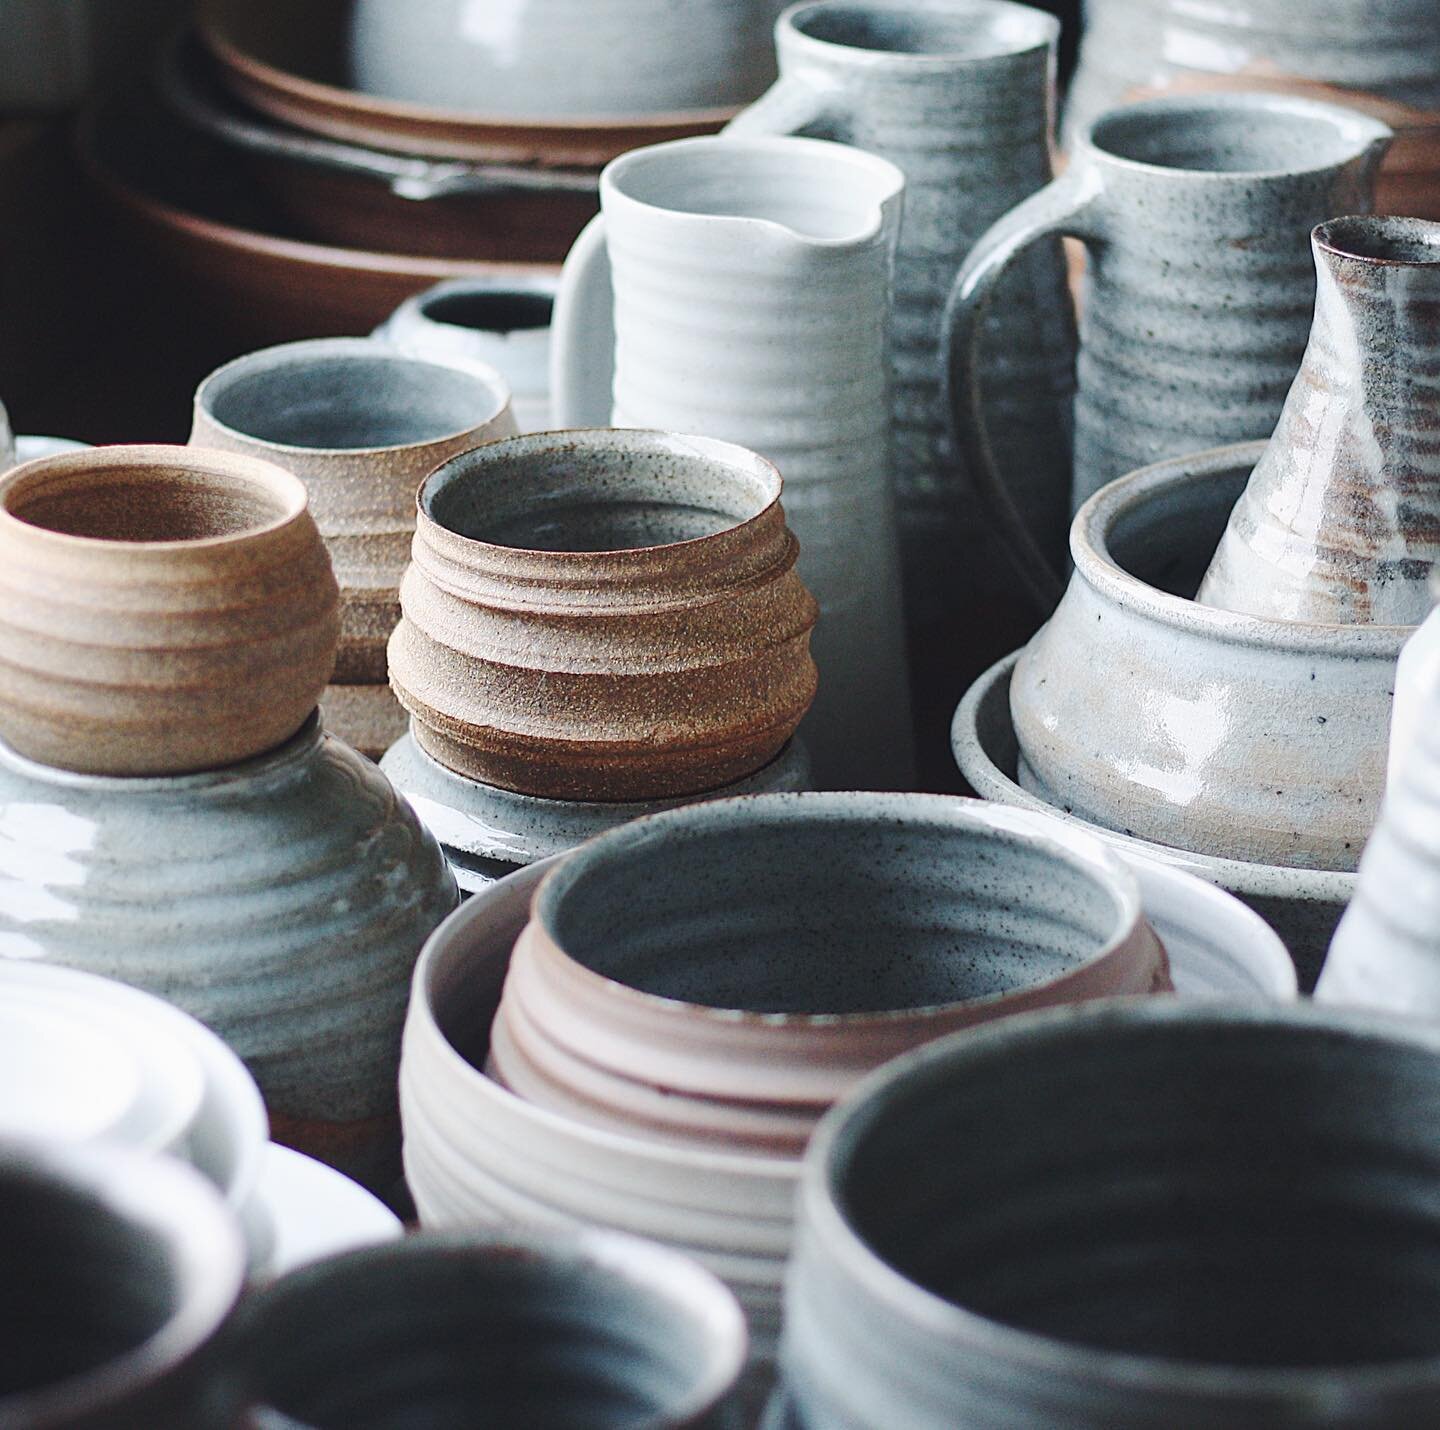 Pots en masse in the studio today as I prepare work for an upcoming event. After spending the best part of this year doing repetition work, it was lovely to properly reacquaint myself with some one off pieces that I&rsquo;ve been keeping to one side.